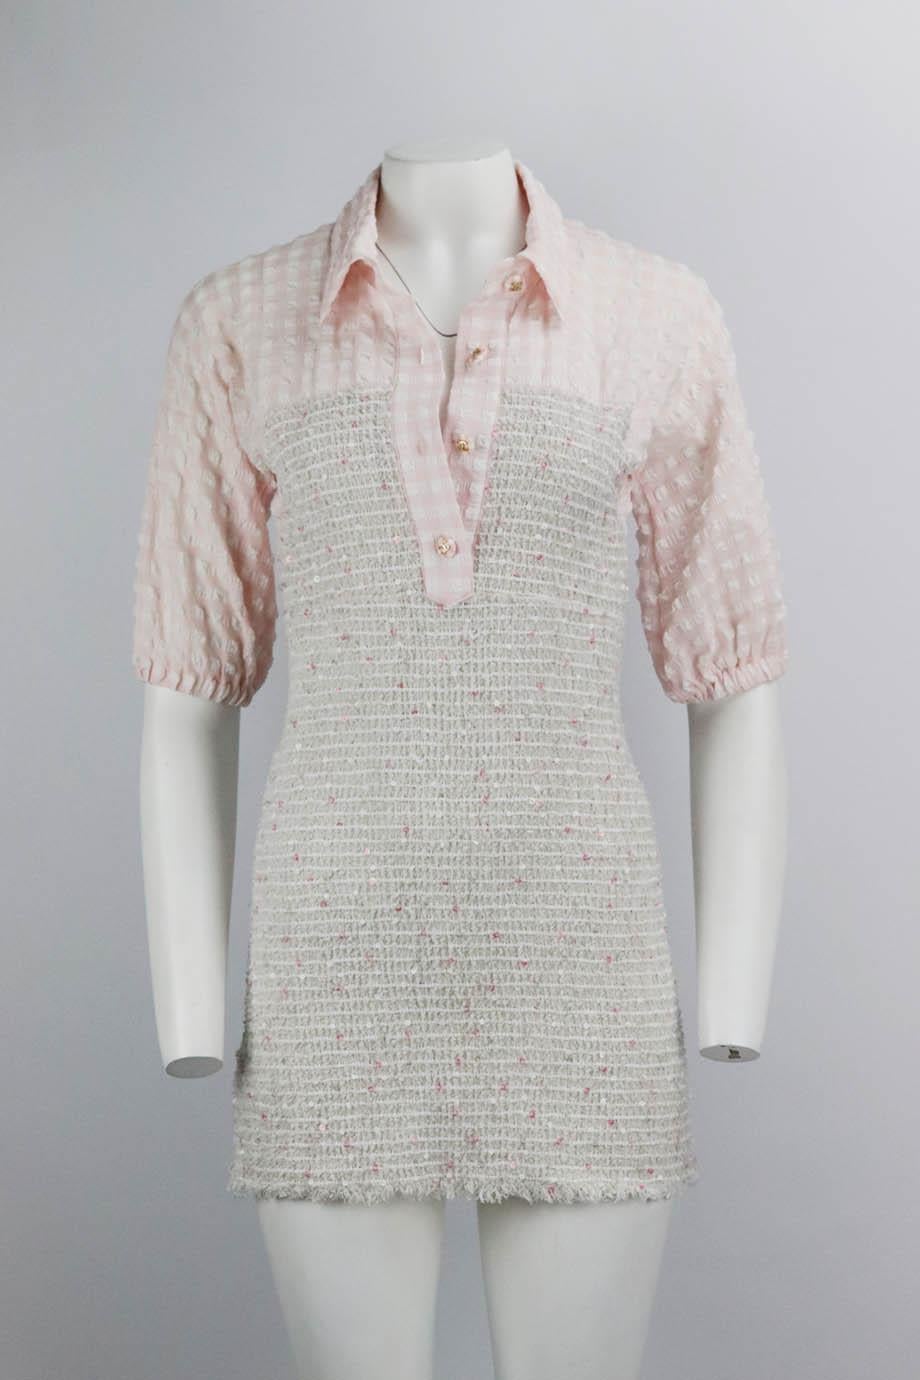 Chanel sample cotton blend tweed mini dress. Pink and white. Short sleeve, v-neck. Zip fastening at back. 38% Polyamide, 30% cotton, 21% polyester, 10% wool, 1% acetate. Size: FR 38 (UK 10, US 6, IT 42). Bust: 31 in. Waist: 26 in. Hips: 33 in.